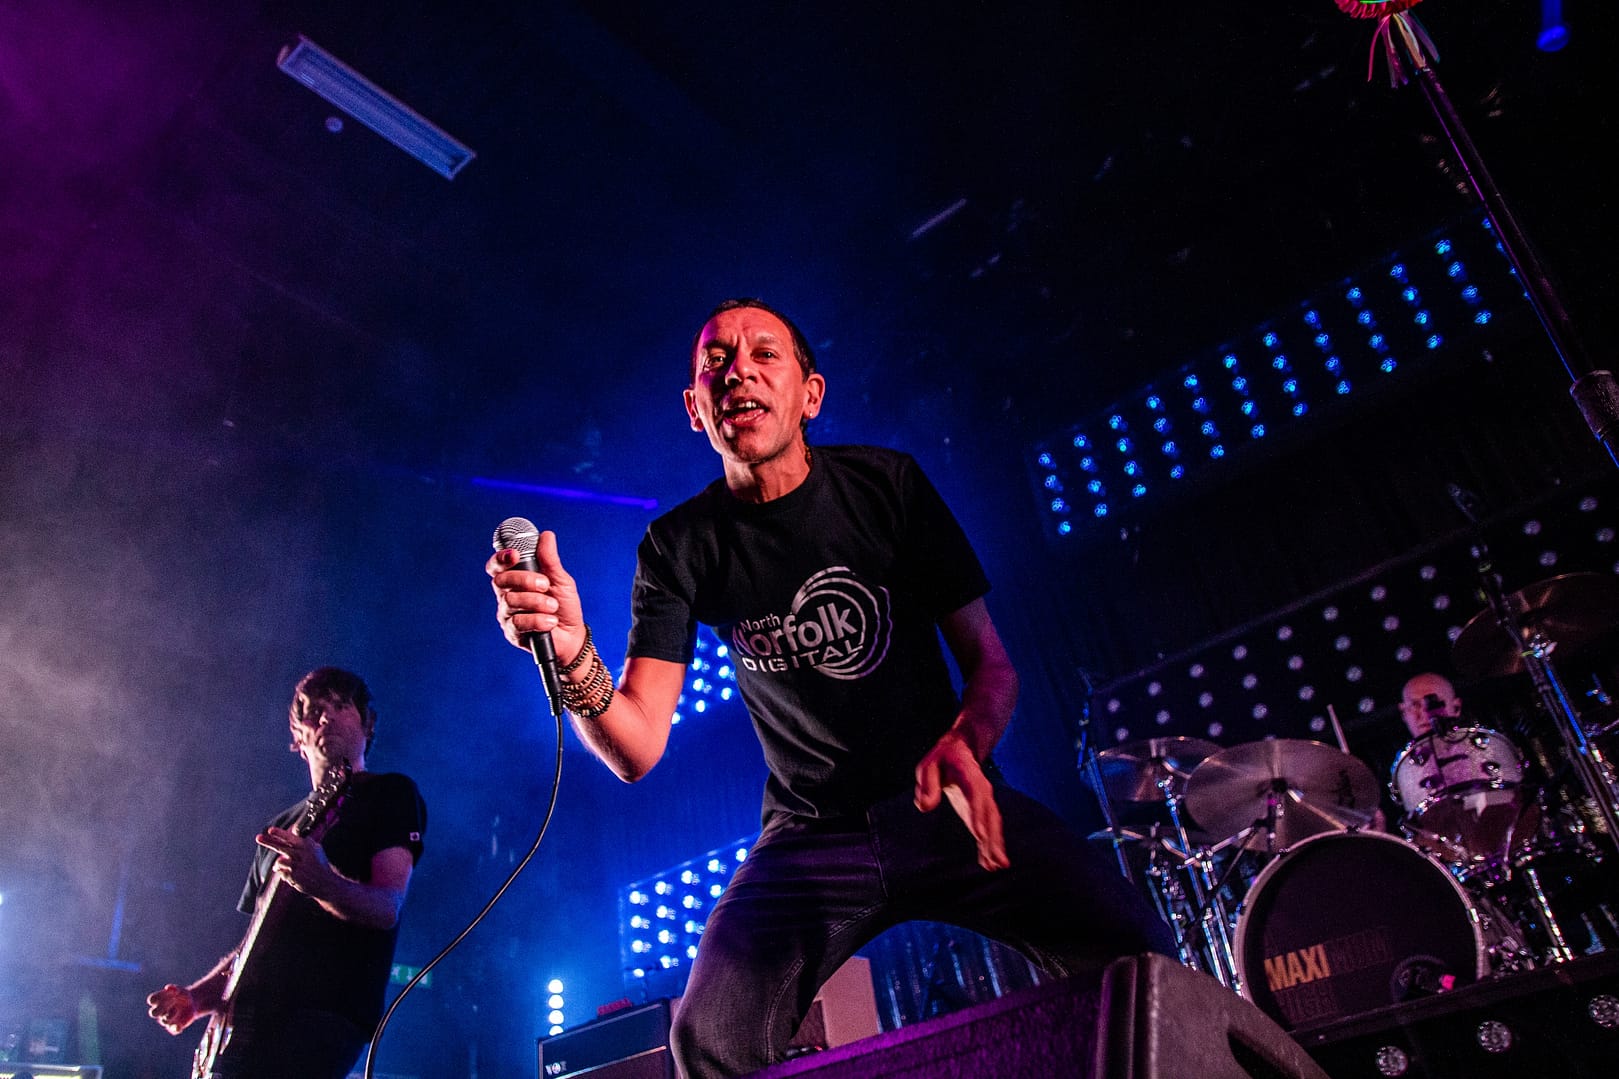 IMG 1906 530x353 - LIVE REVIEW - SHED SEVEN, 23/11/2021